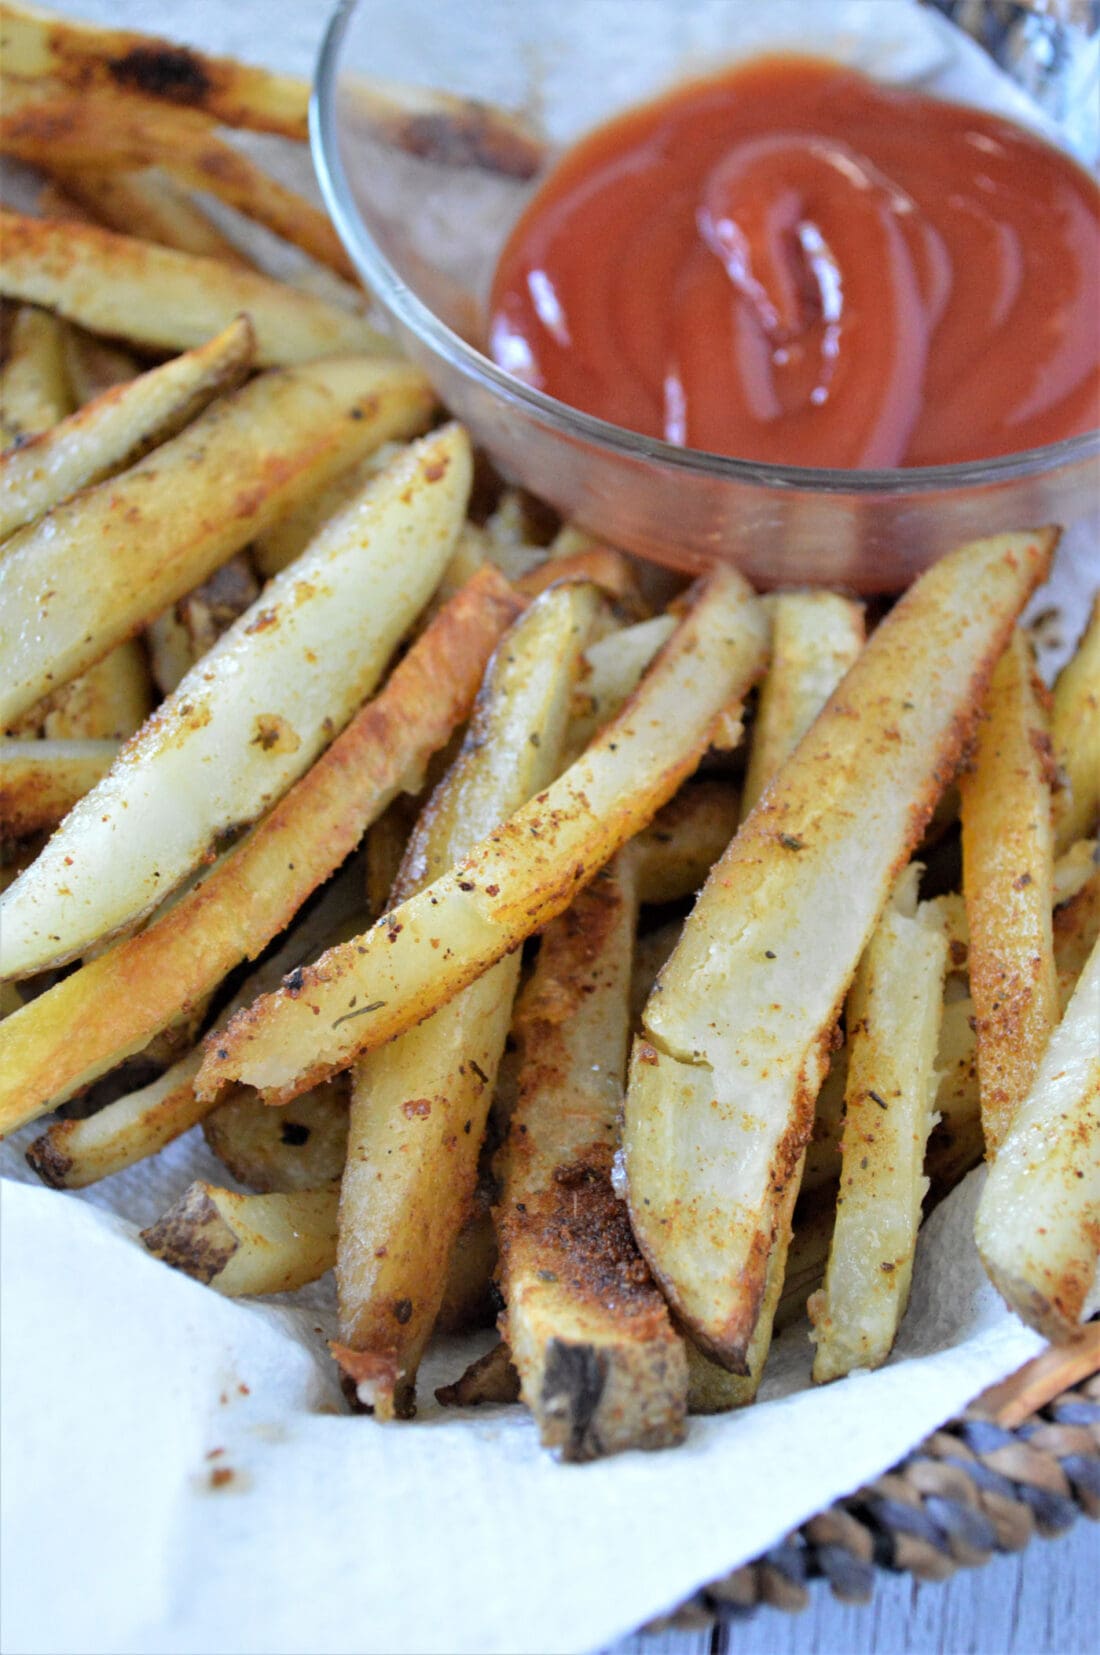 Baked French Fries with ketchup